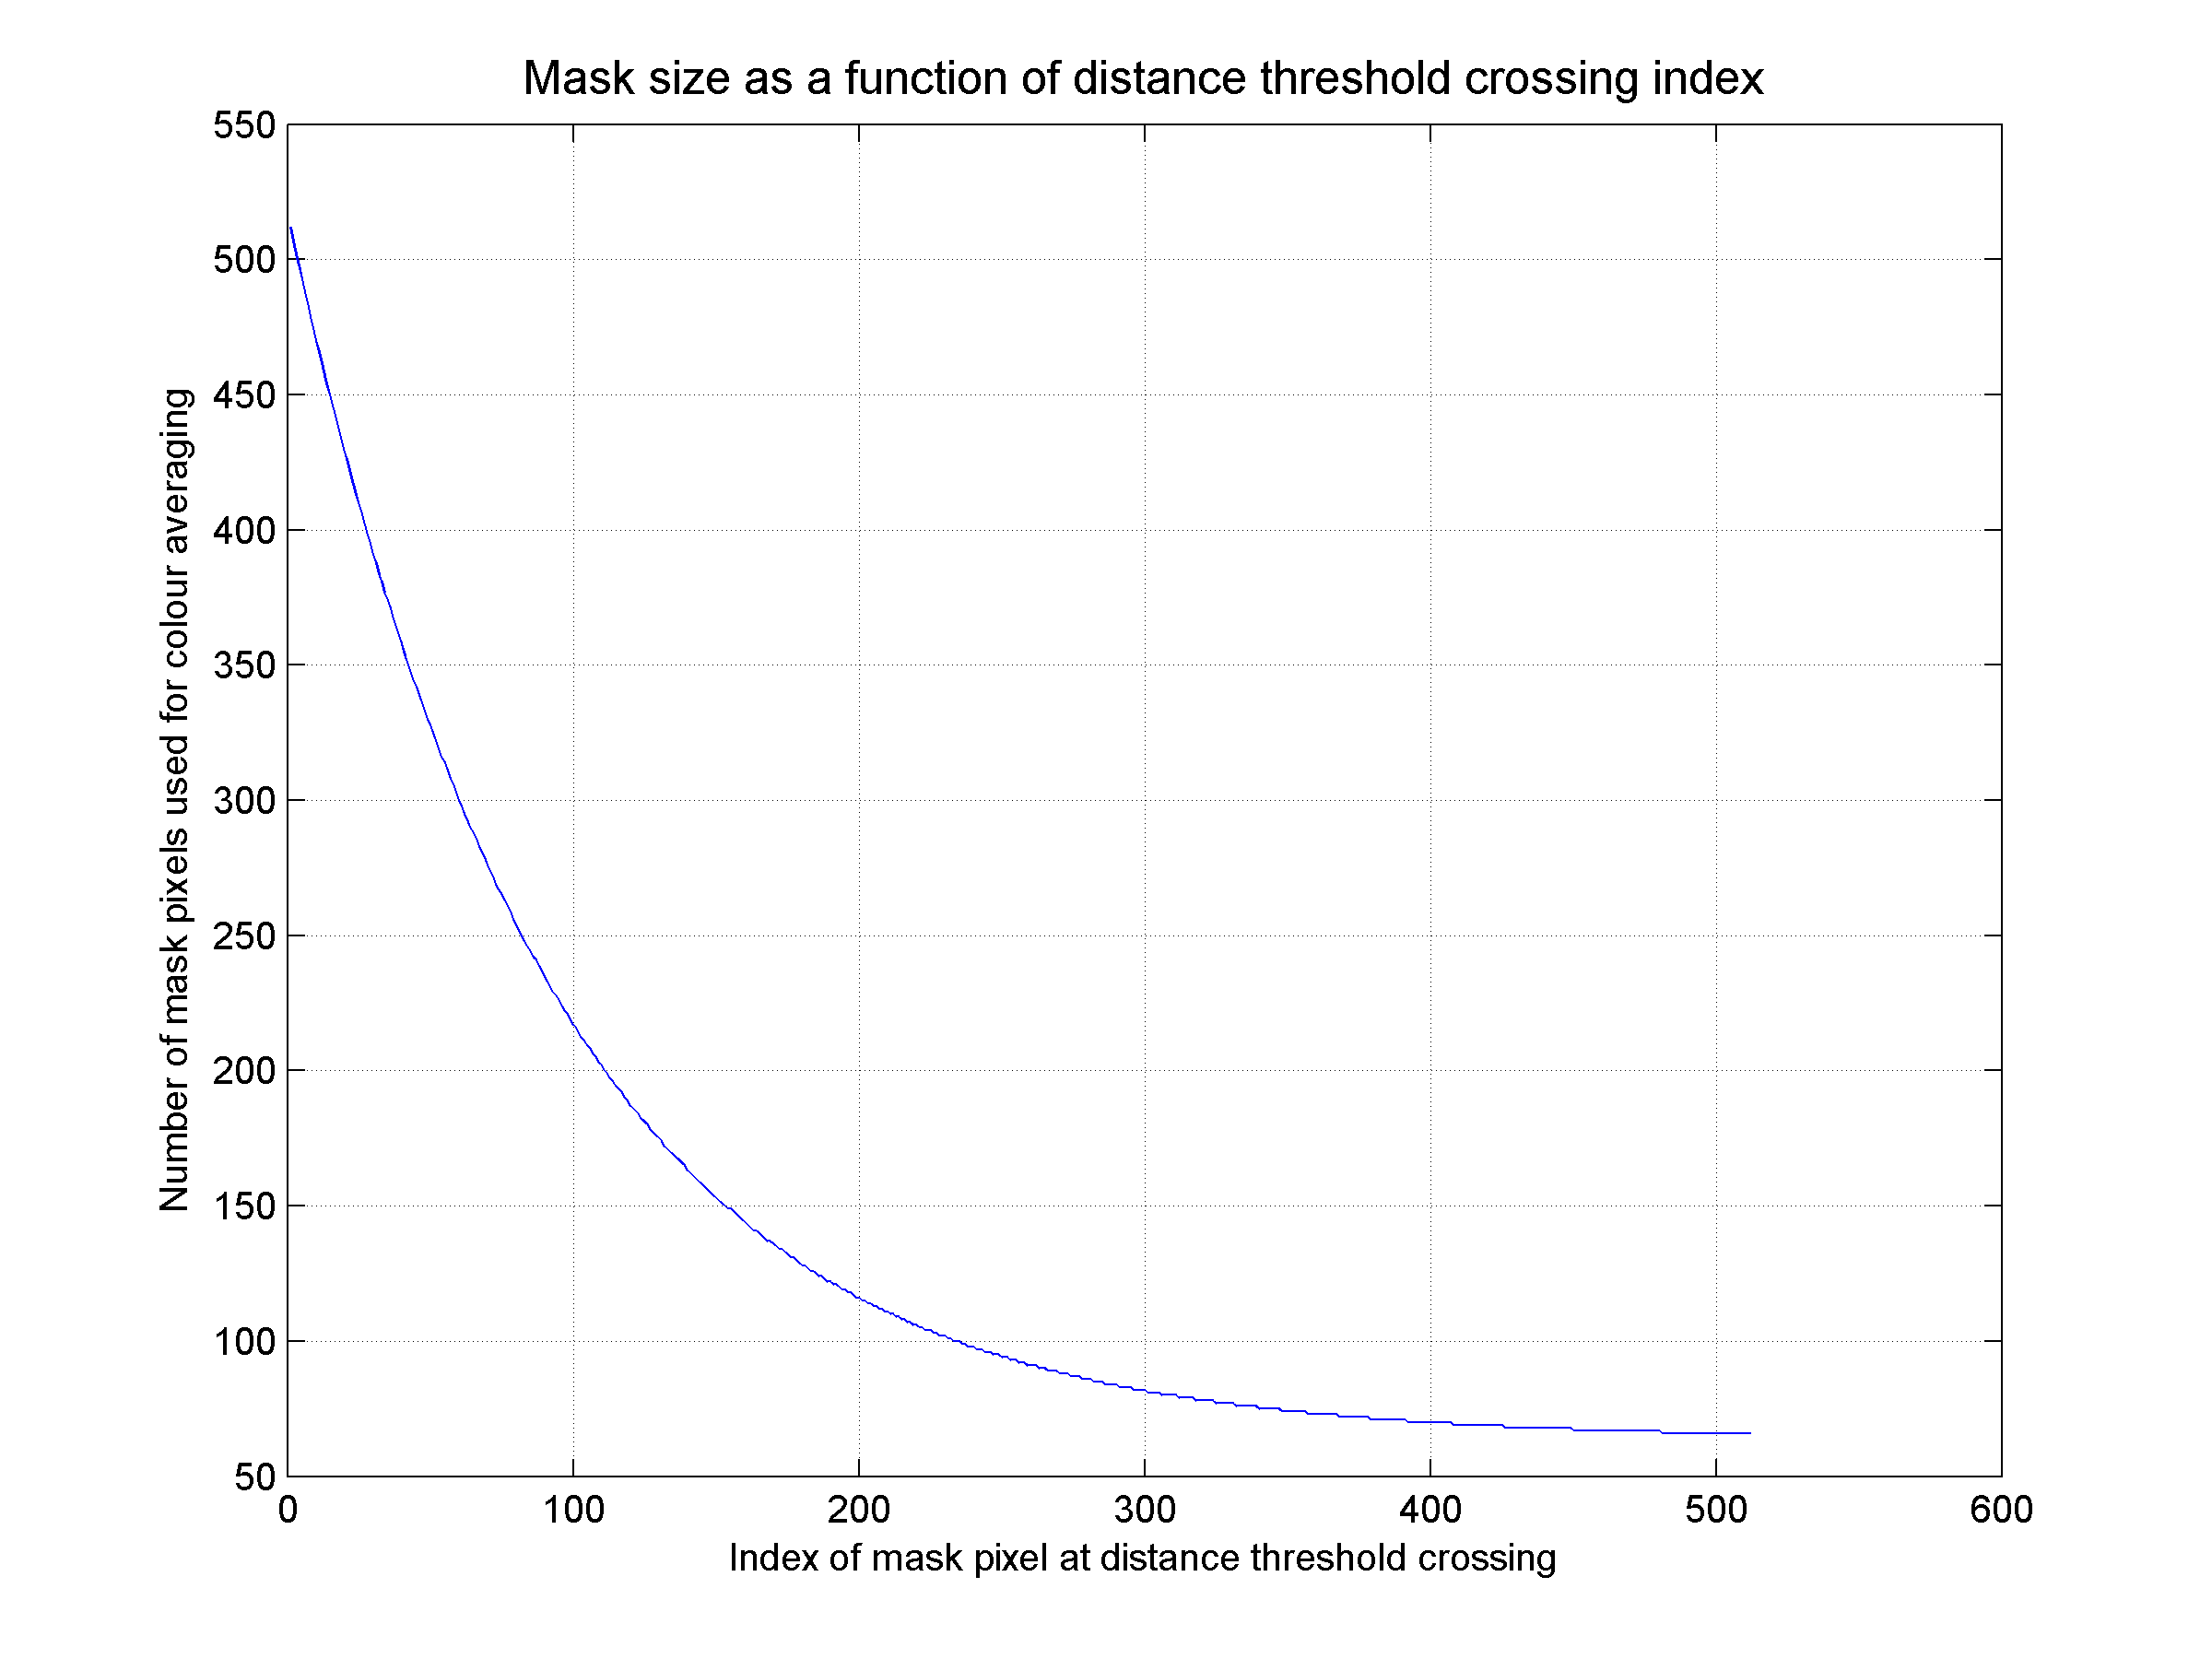 Plot of colour averaging mask sizes assigned to various distance threshold crossing indices in the full filtering mask